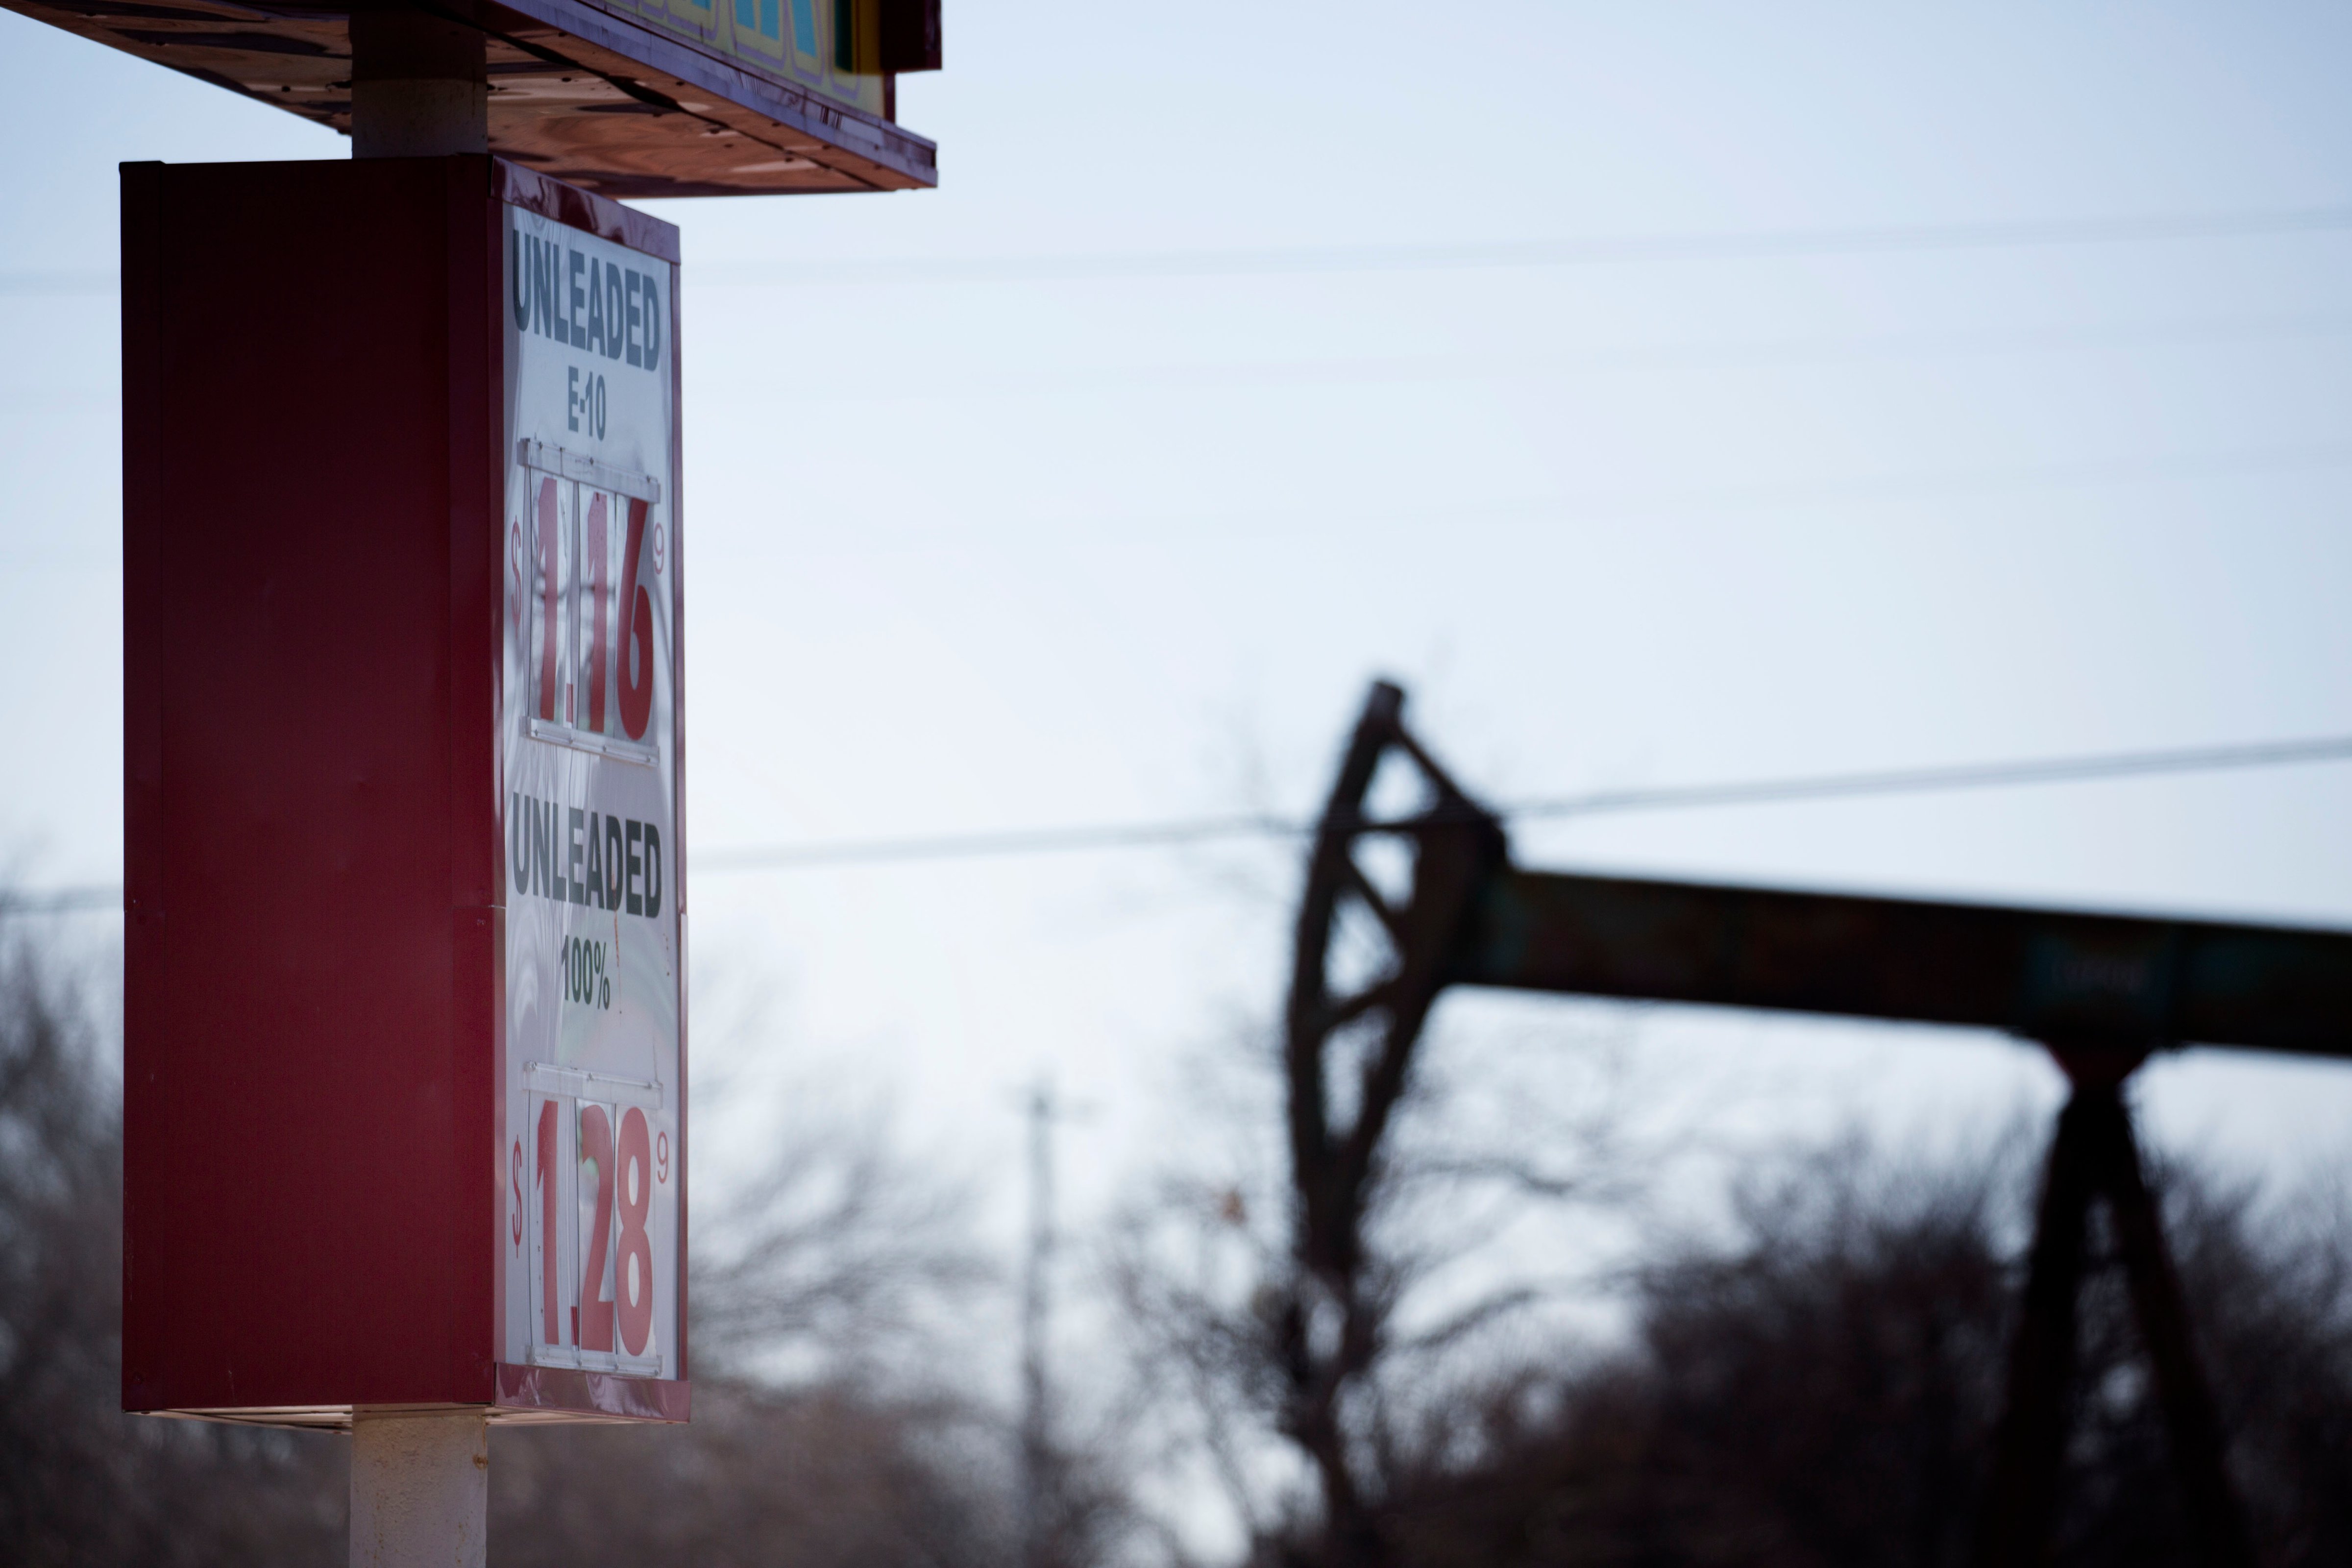 A gas station, near an oil well pumper, was selling gas for $1.16 a gallon February 12, 2016 in Oklahoma City, Oklahoma. (J Pat Carter/Getty Images)